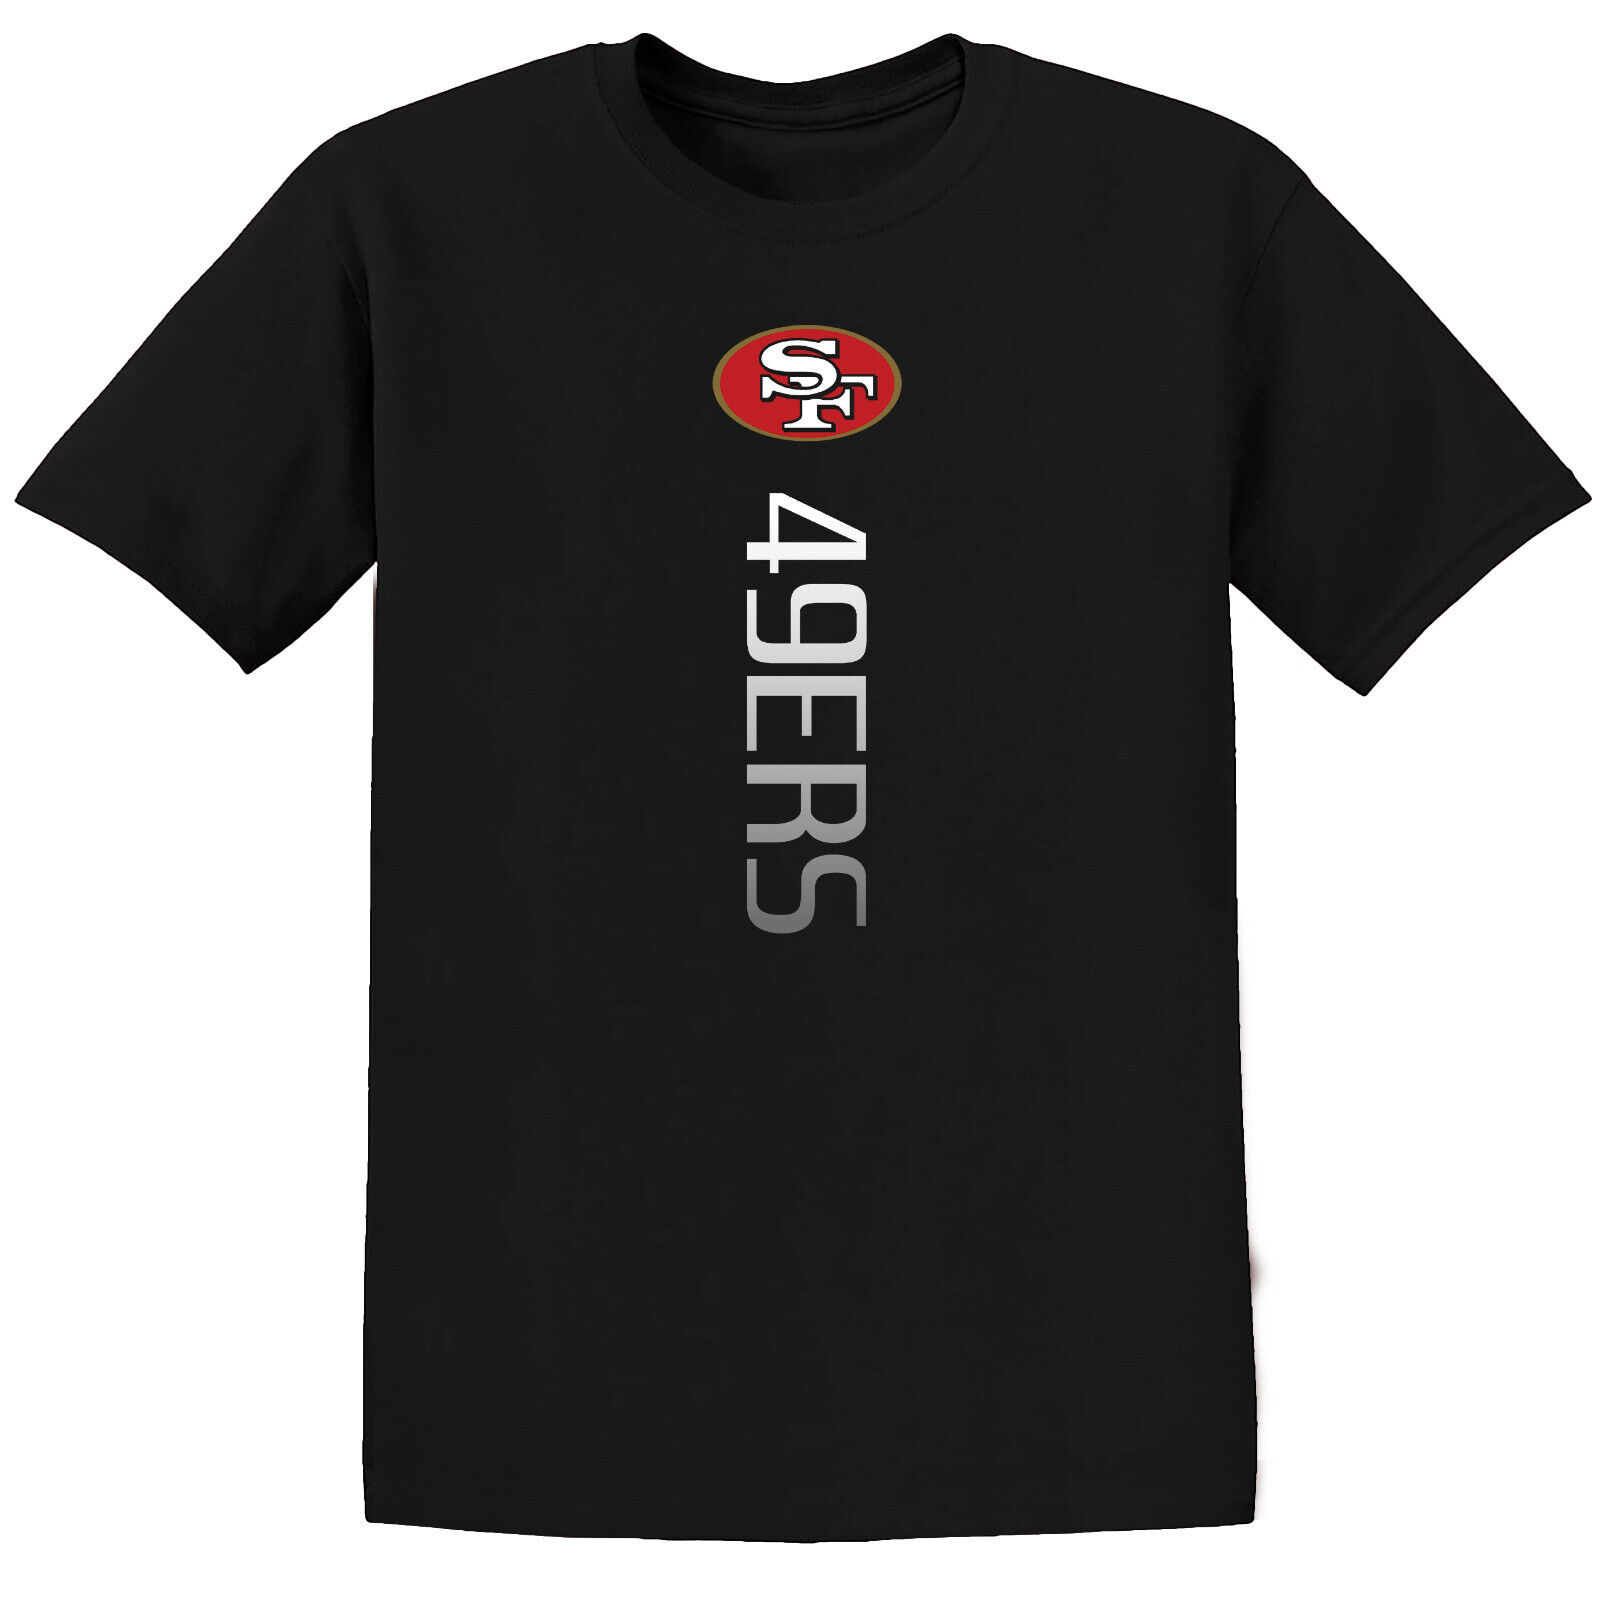 San Francisco 49ers T-Shirt - Adult and Kids Sizes